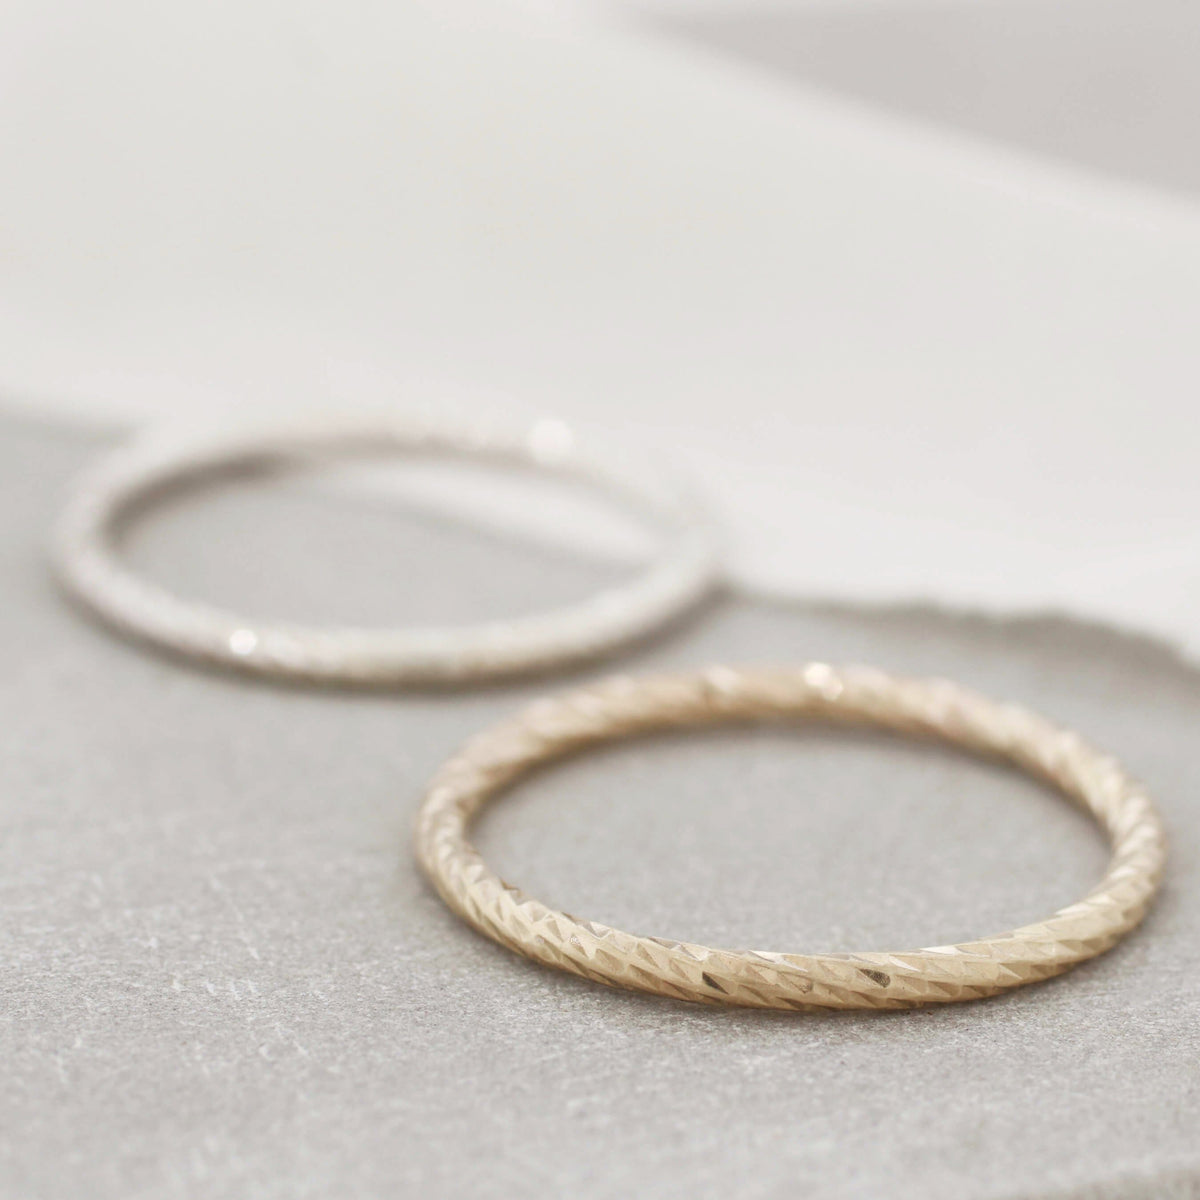 Faceted Band Rings. 9ct Gold Stackable Ring